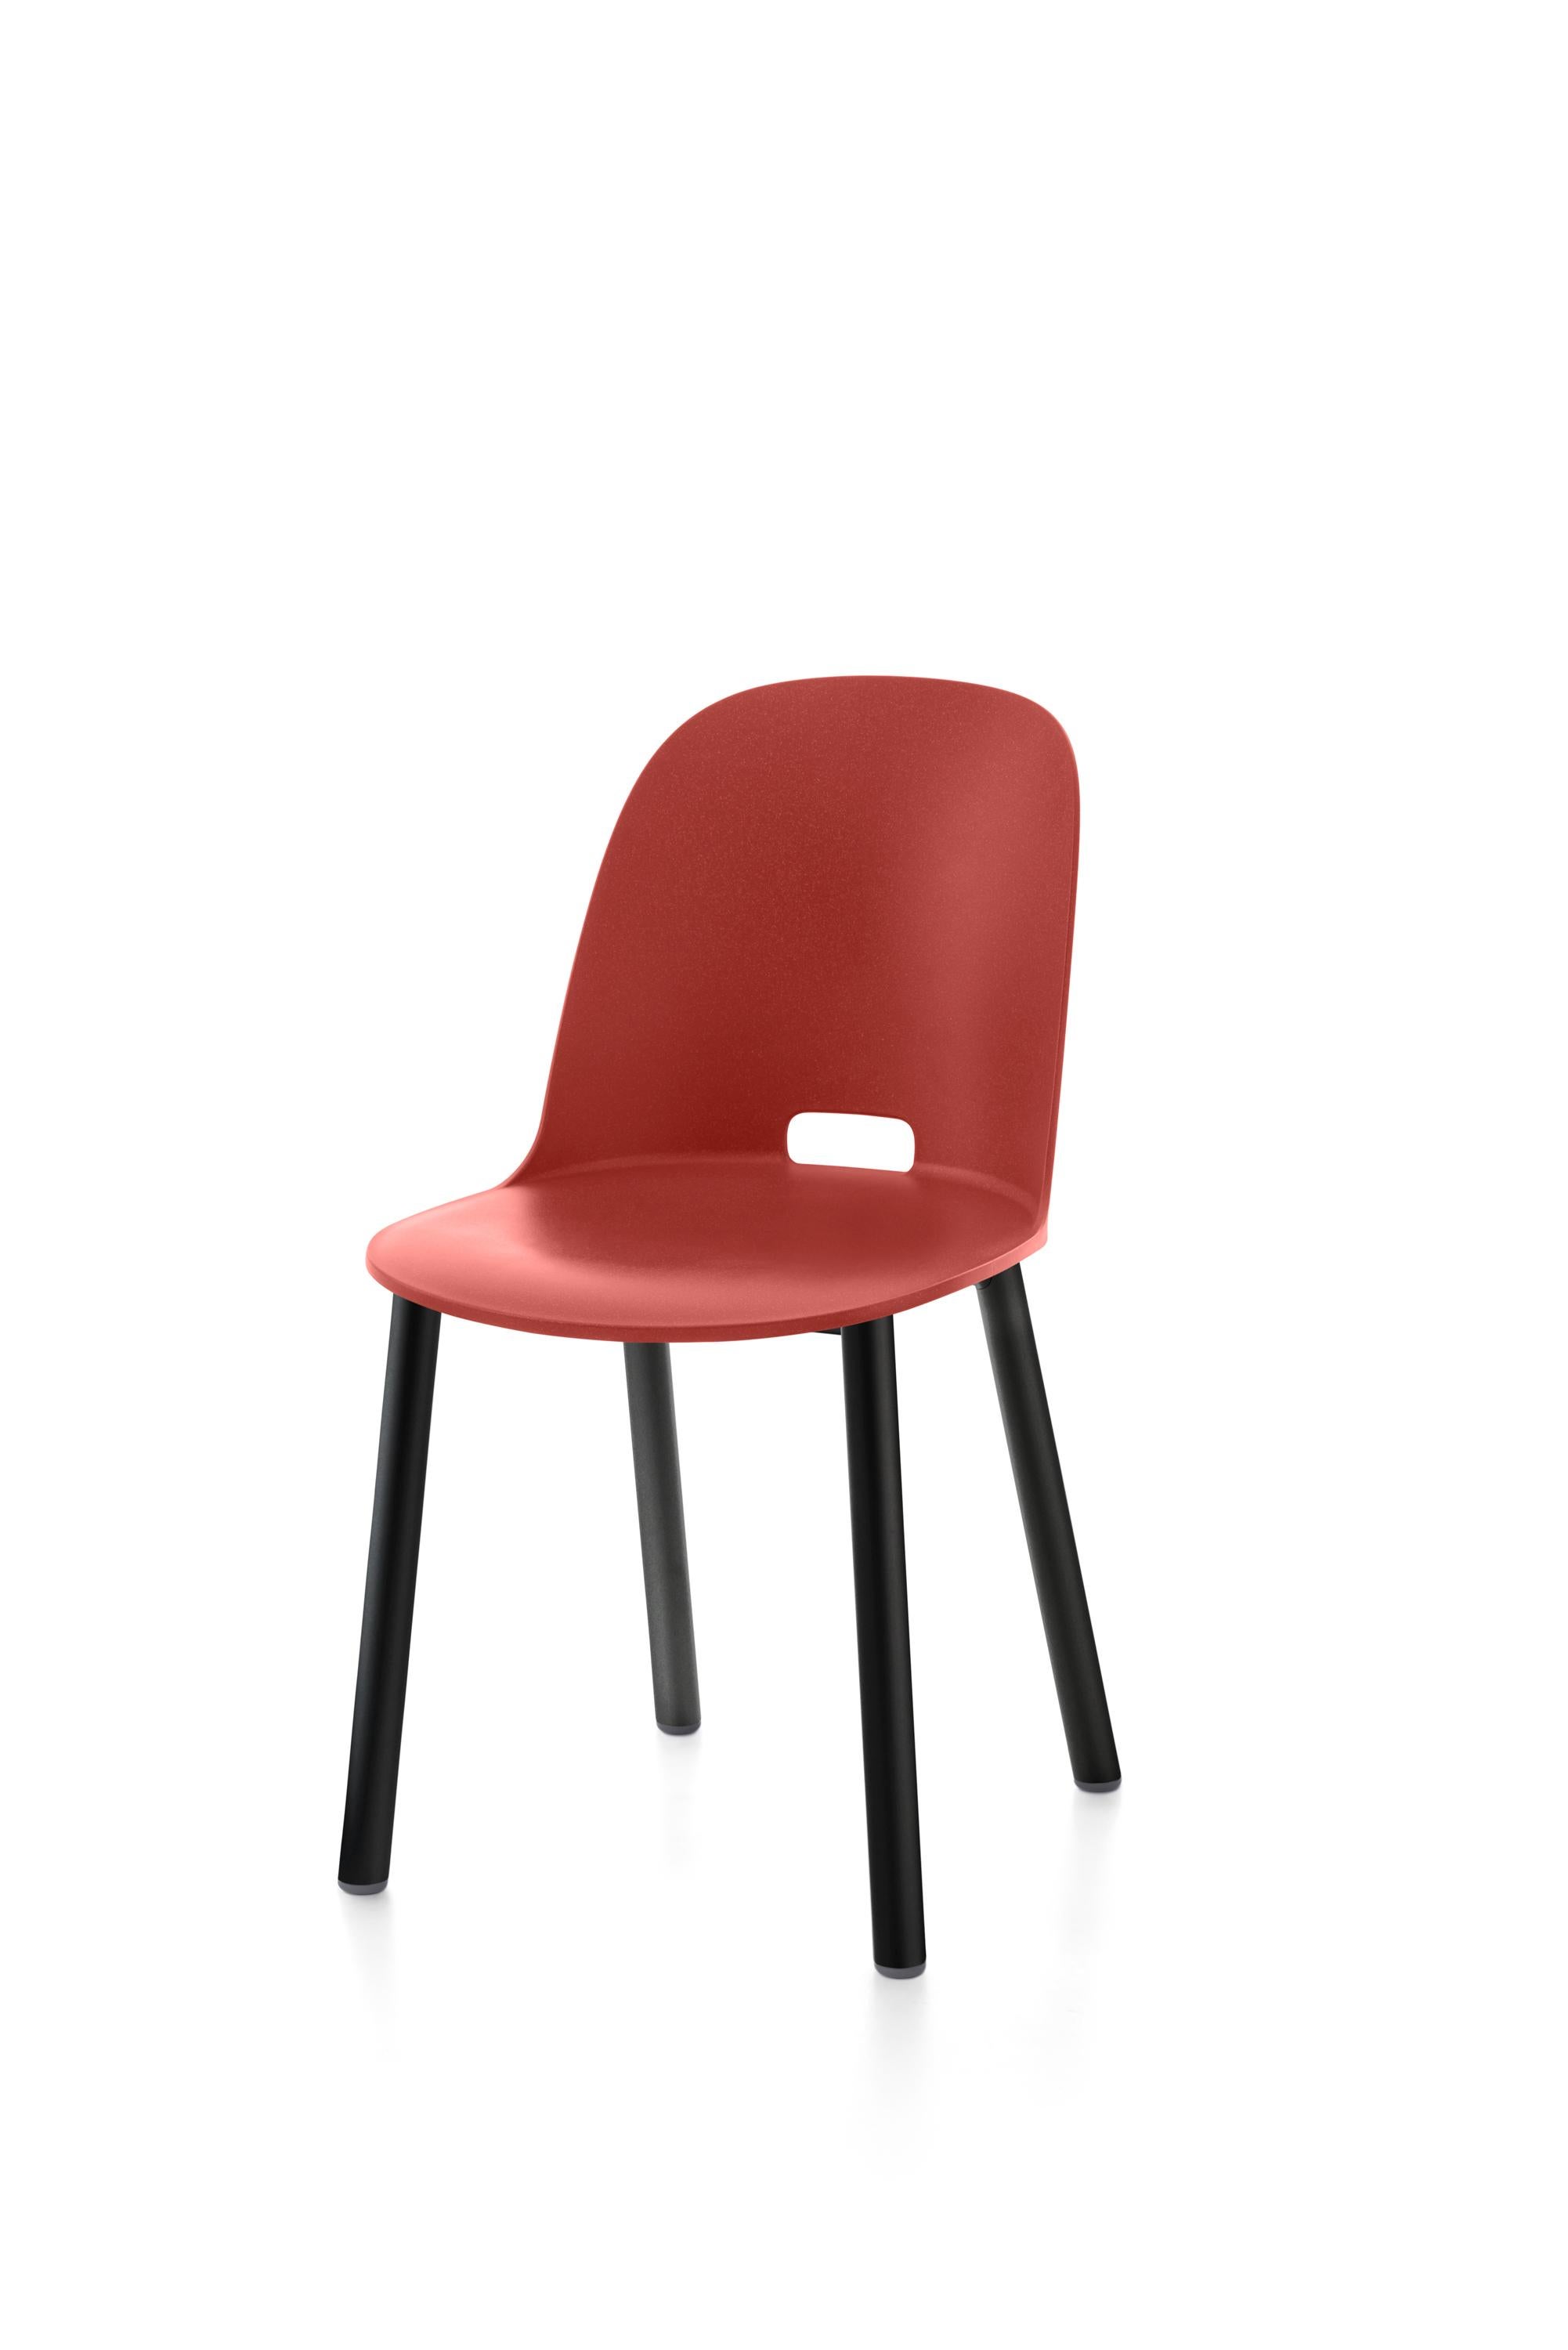 For Sale: Red (Alfi Red) Emeco Alfi High Back Chair with Black Powder Coated Aluminum Frame by Jasper